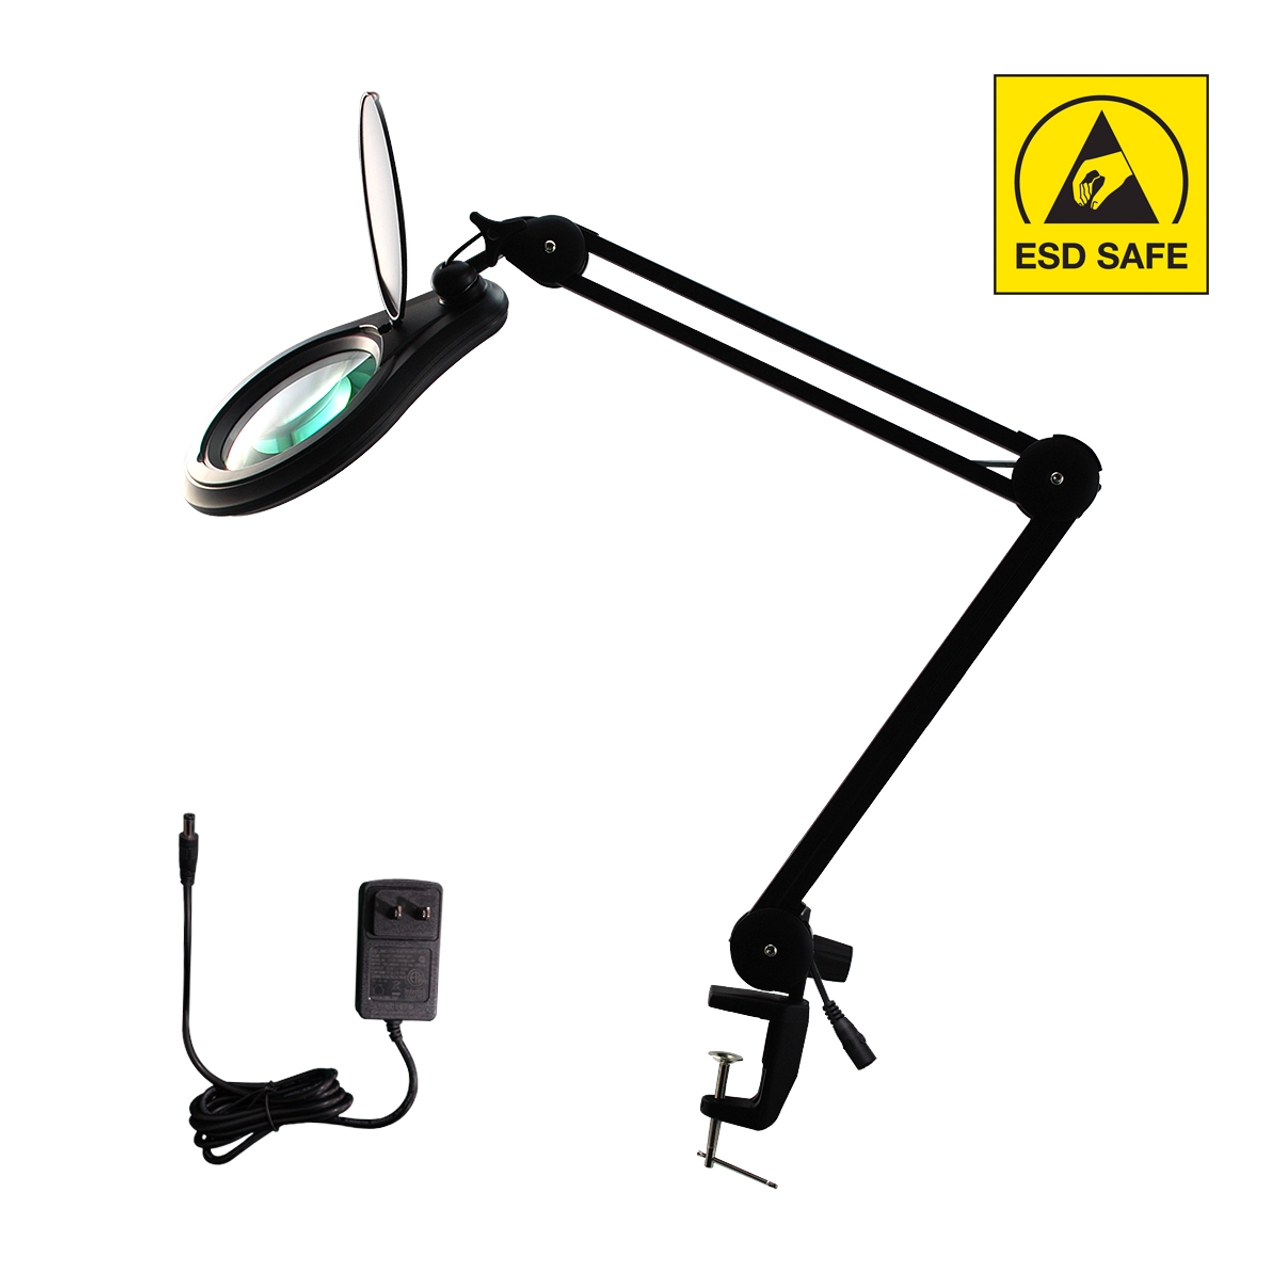 ESD SMD LED Magnifying Lamp with Clamp, 8 Diopter, 5 in. Lens +